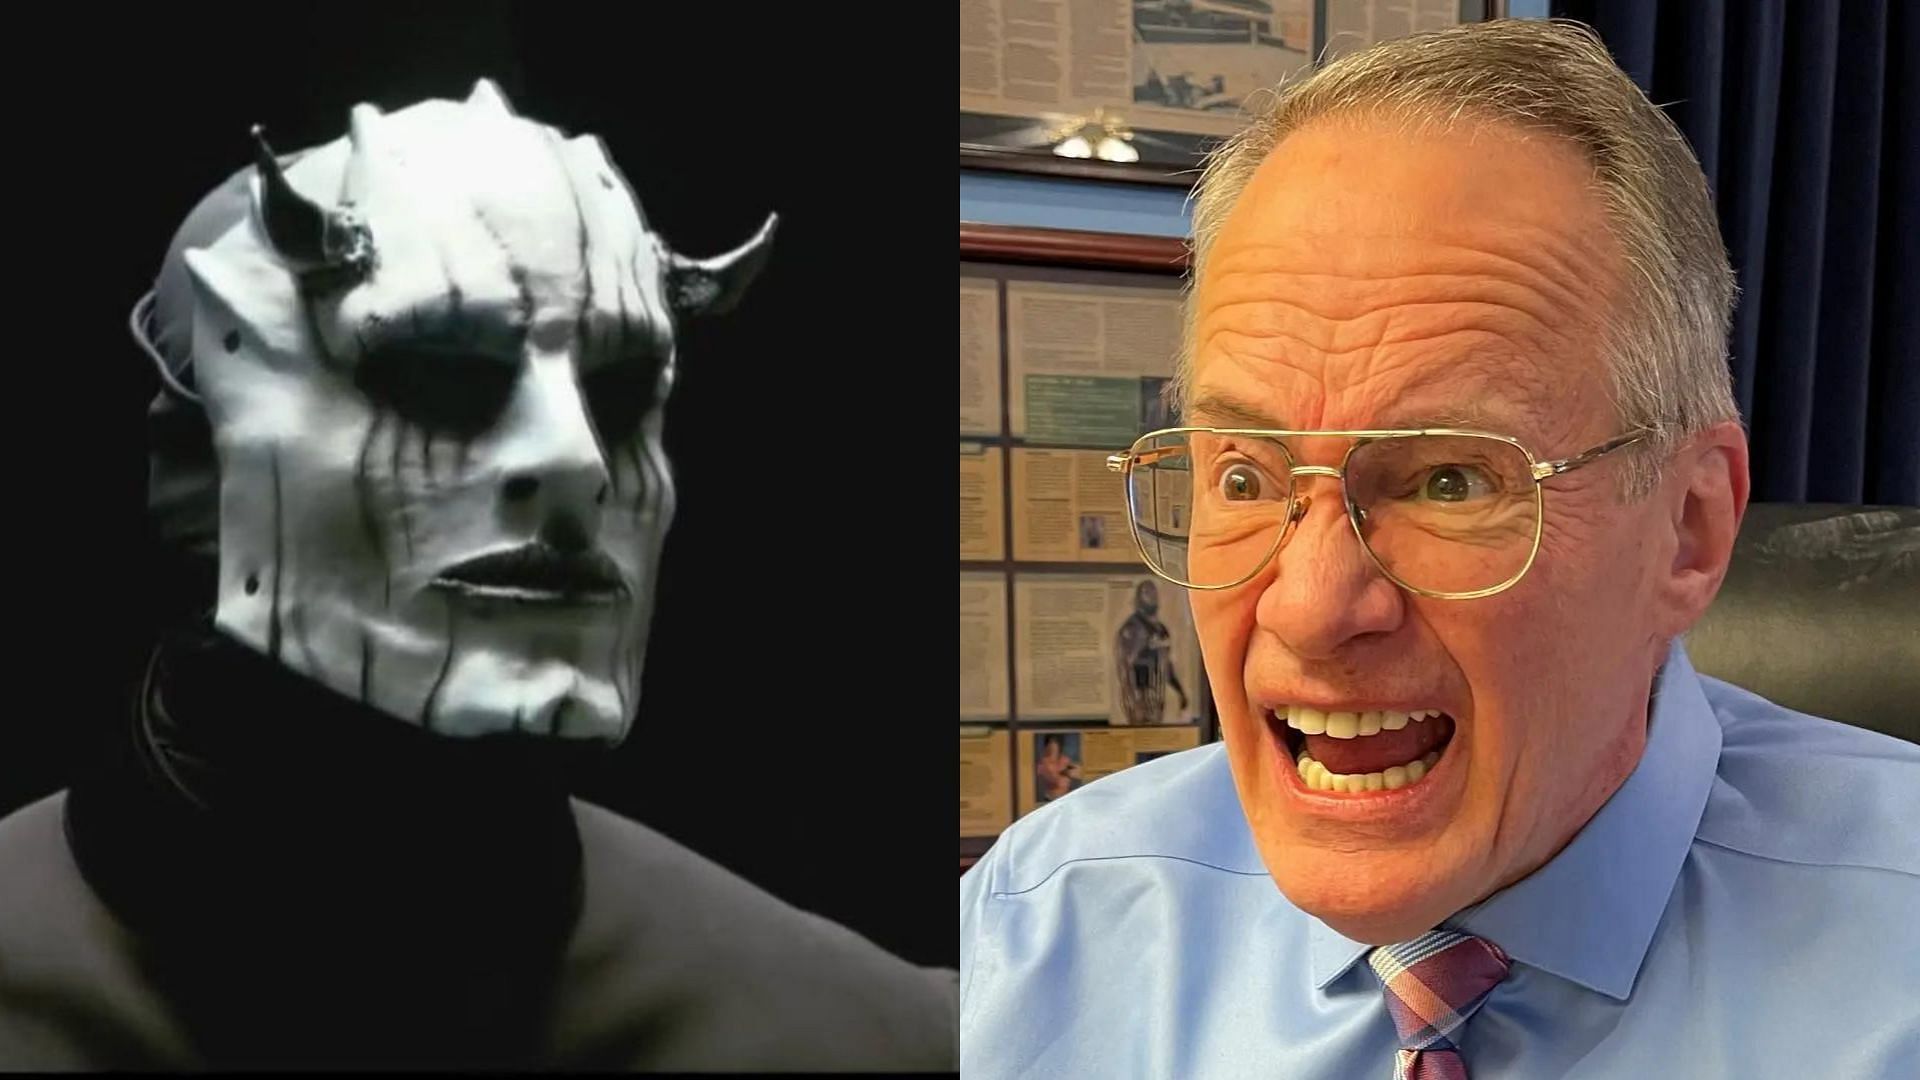 Jim Cornette recently expressed who he believed the Devil could be